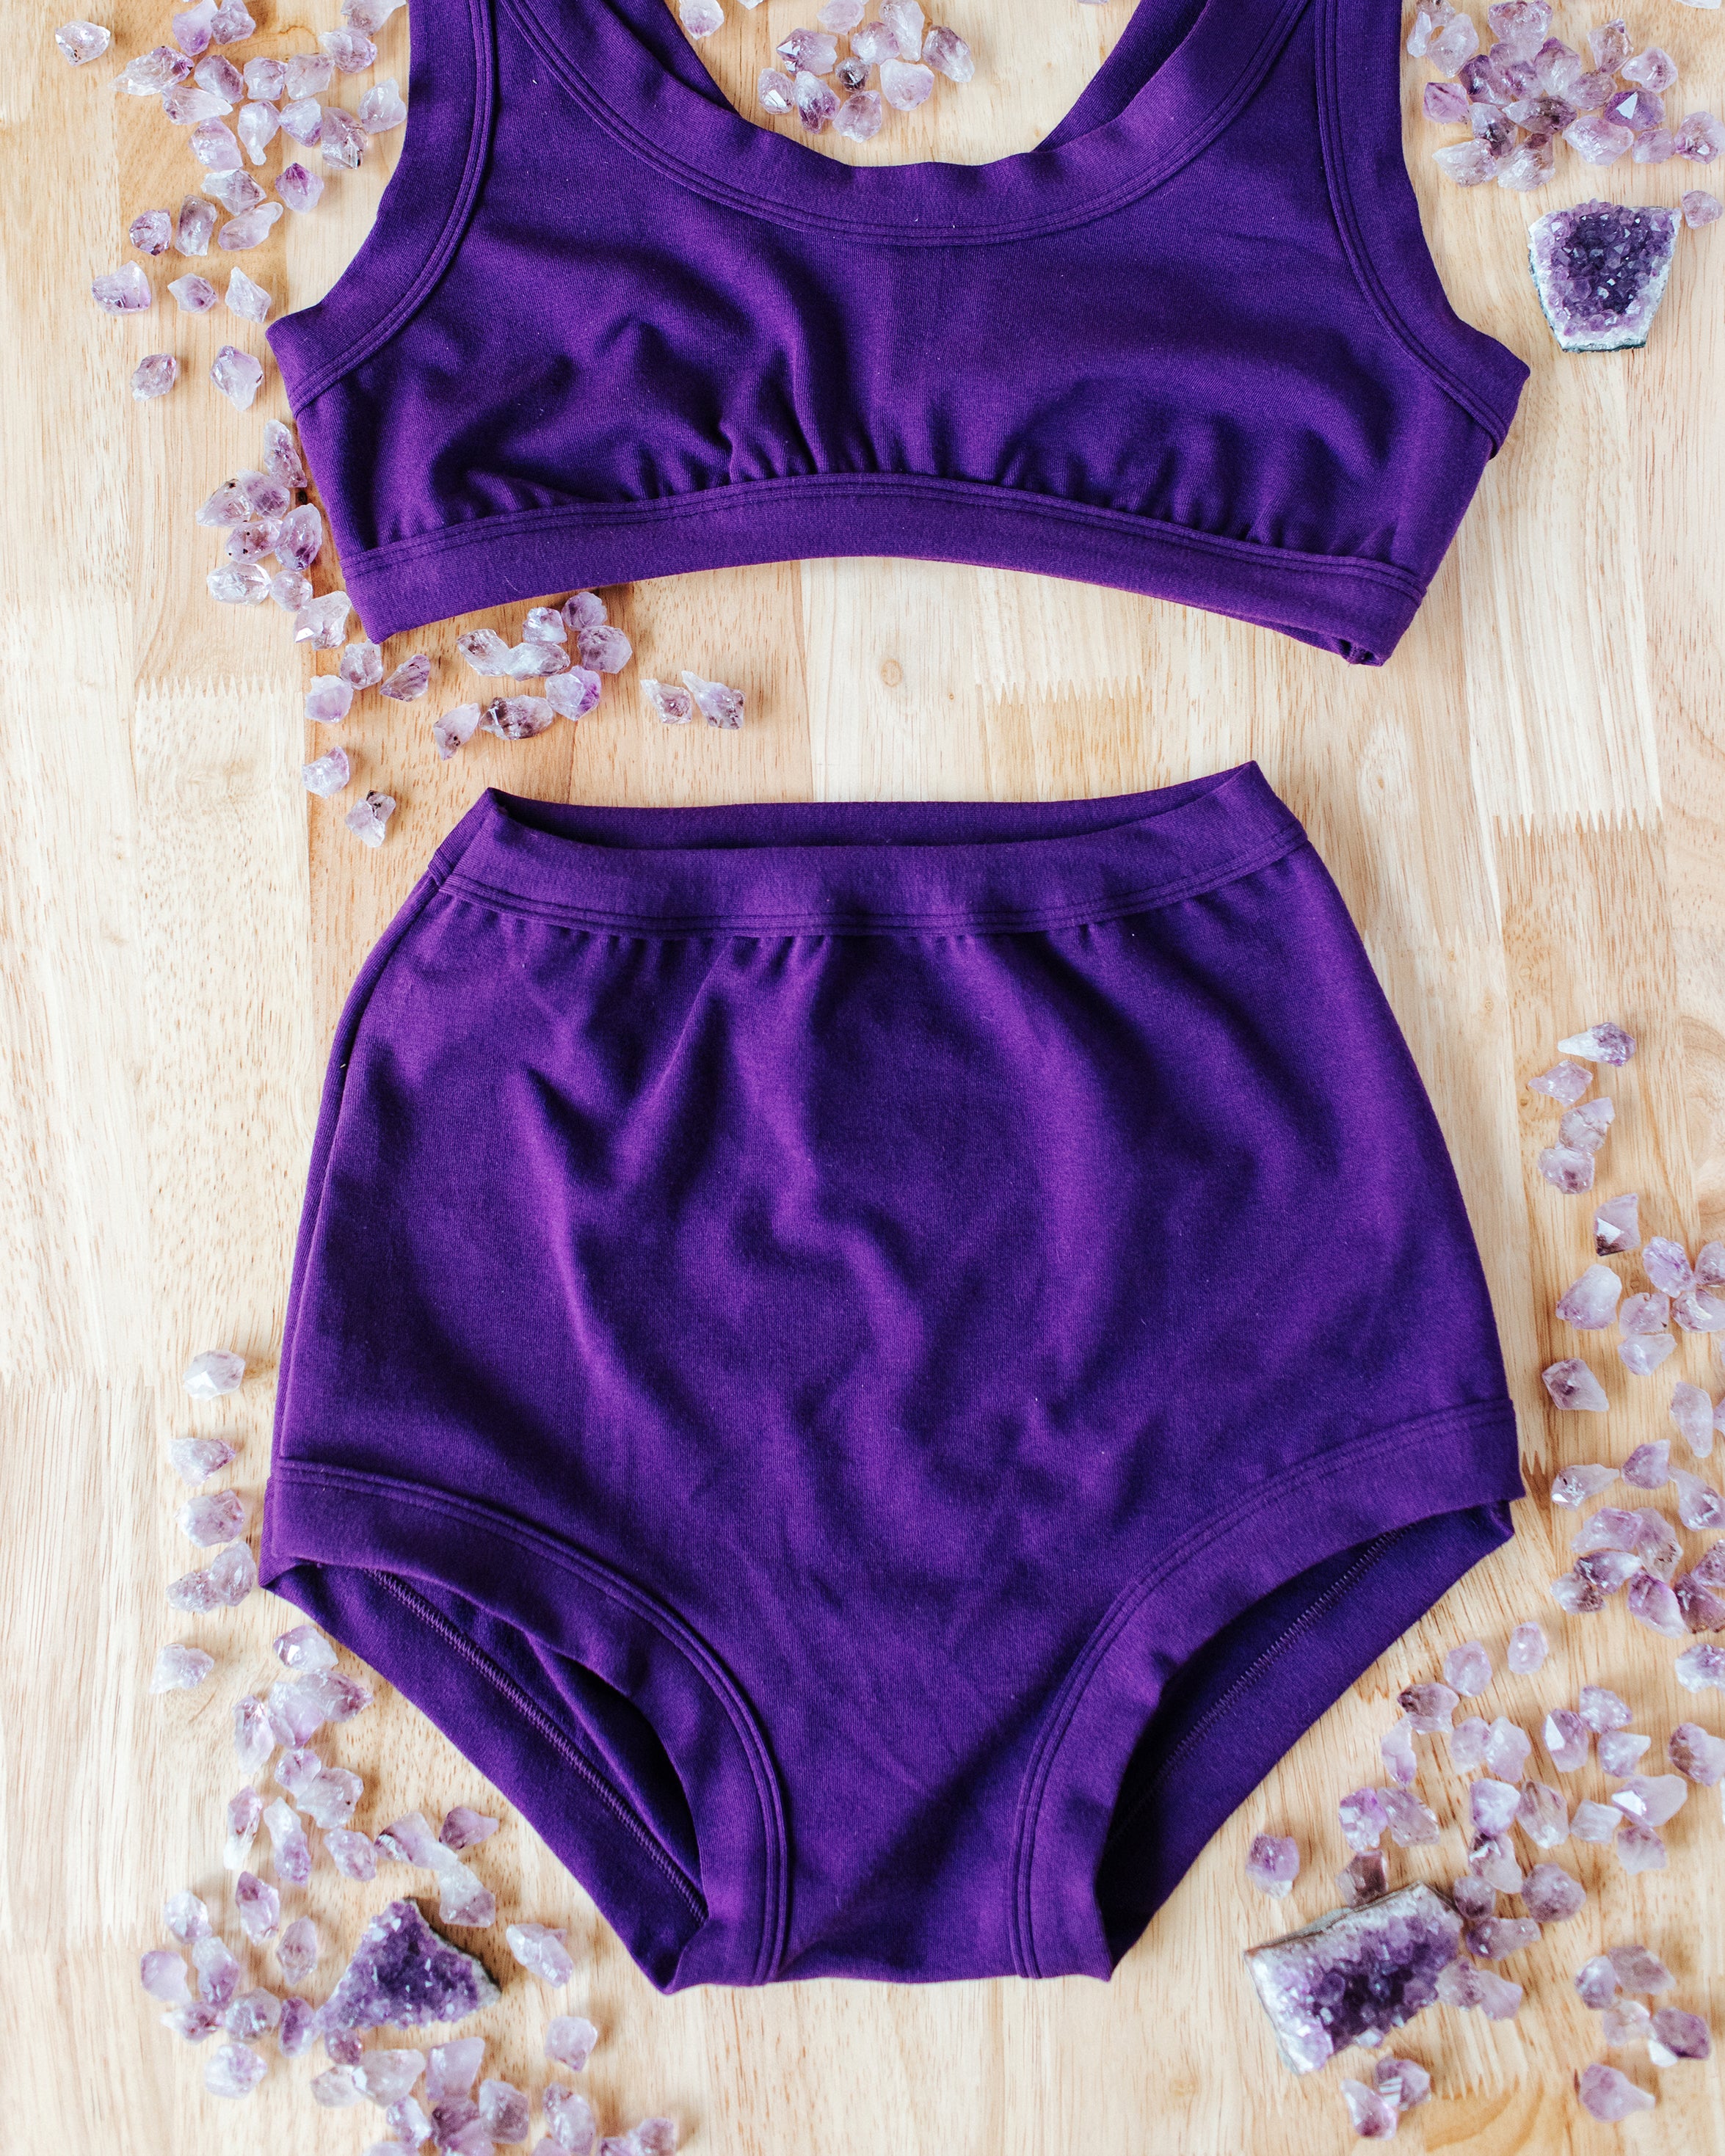 Flat lay of purple Deep Amethyst Sky Rise style underwear on a wood surface with large and small amethyst stones surrounding it.